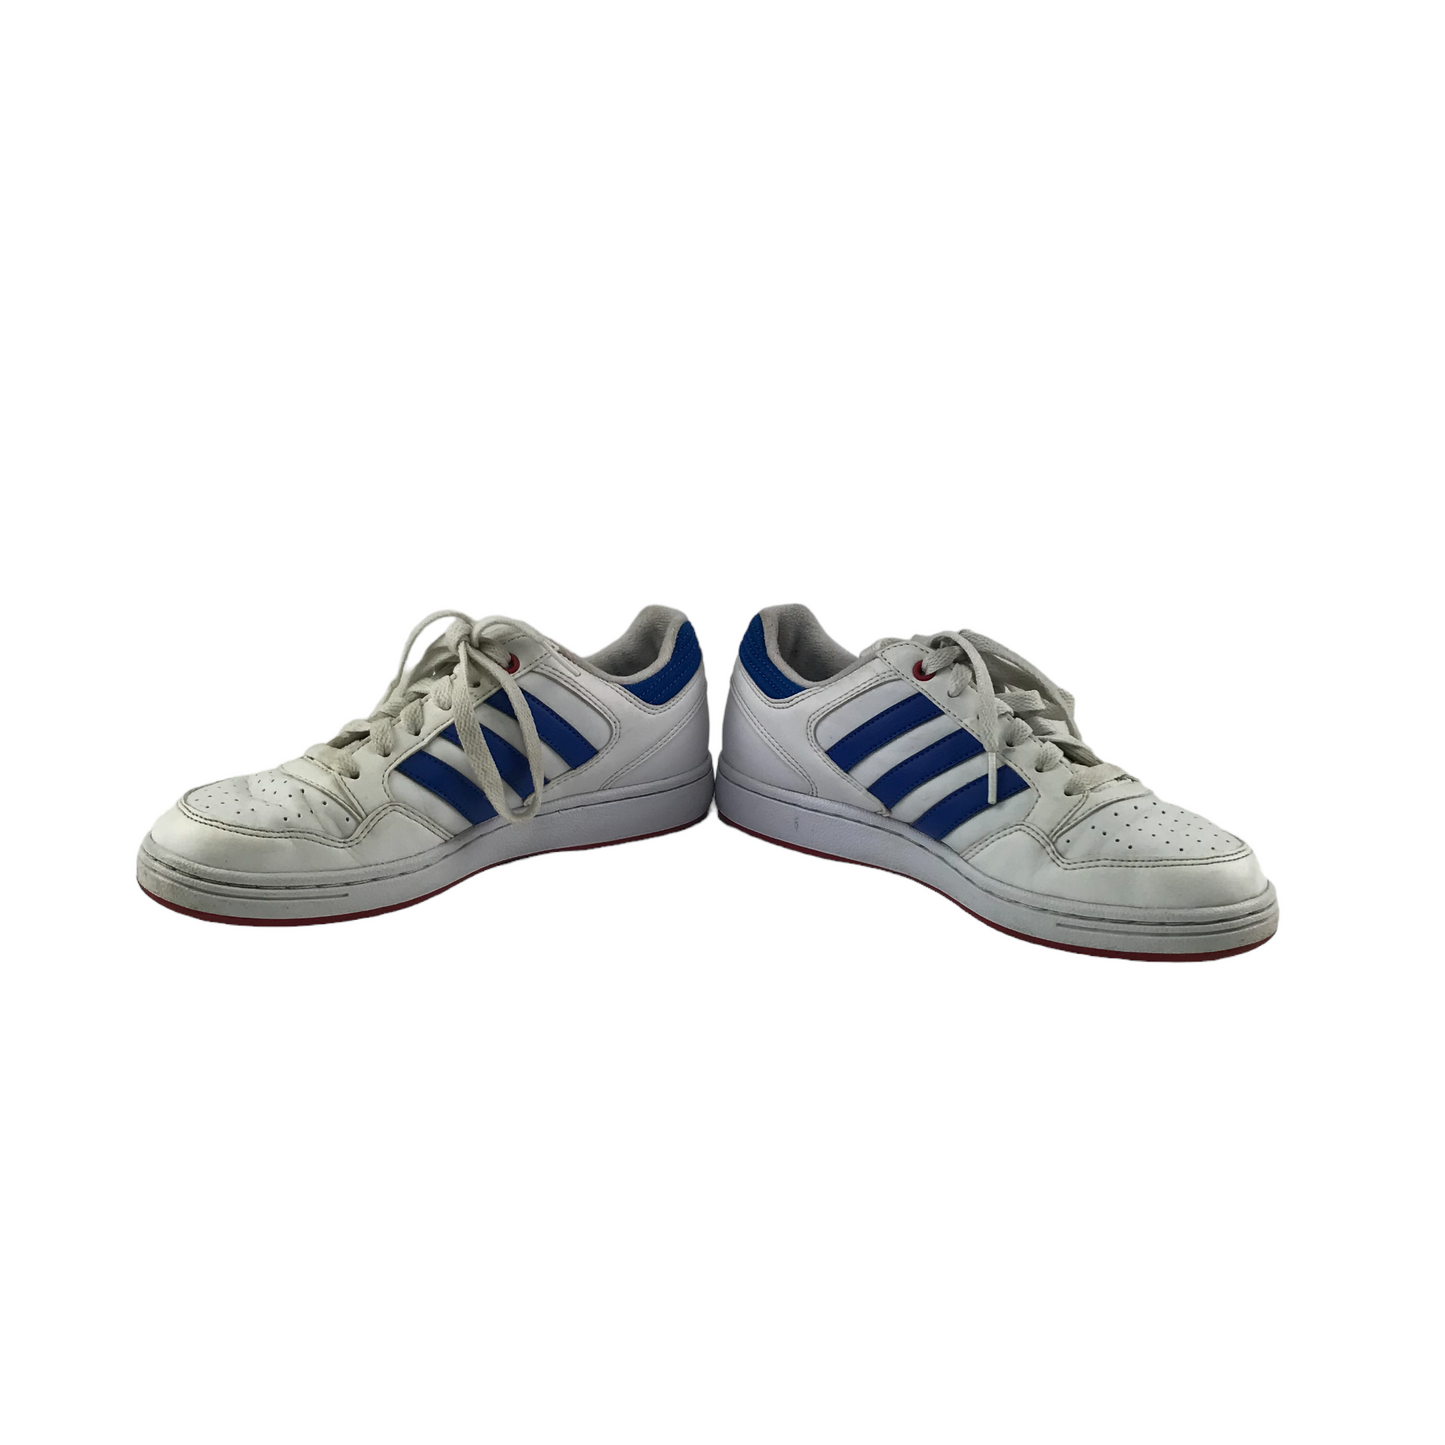 Adidas Trainers Shoe Size 4 White and Blue Three Stripes